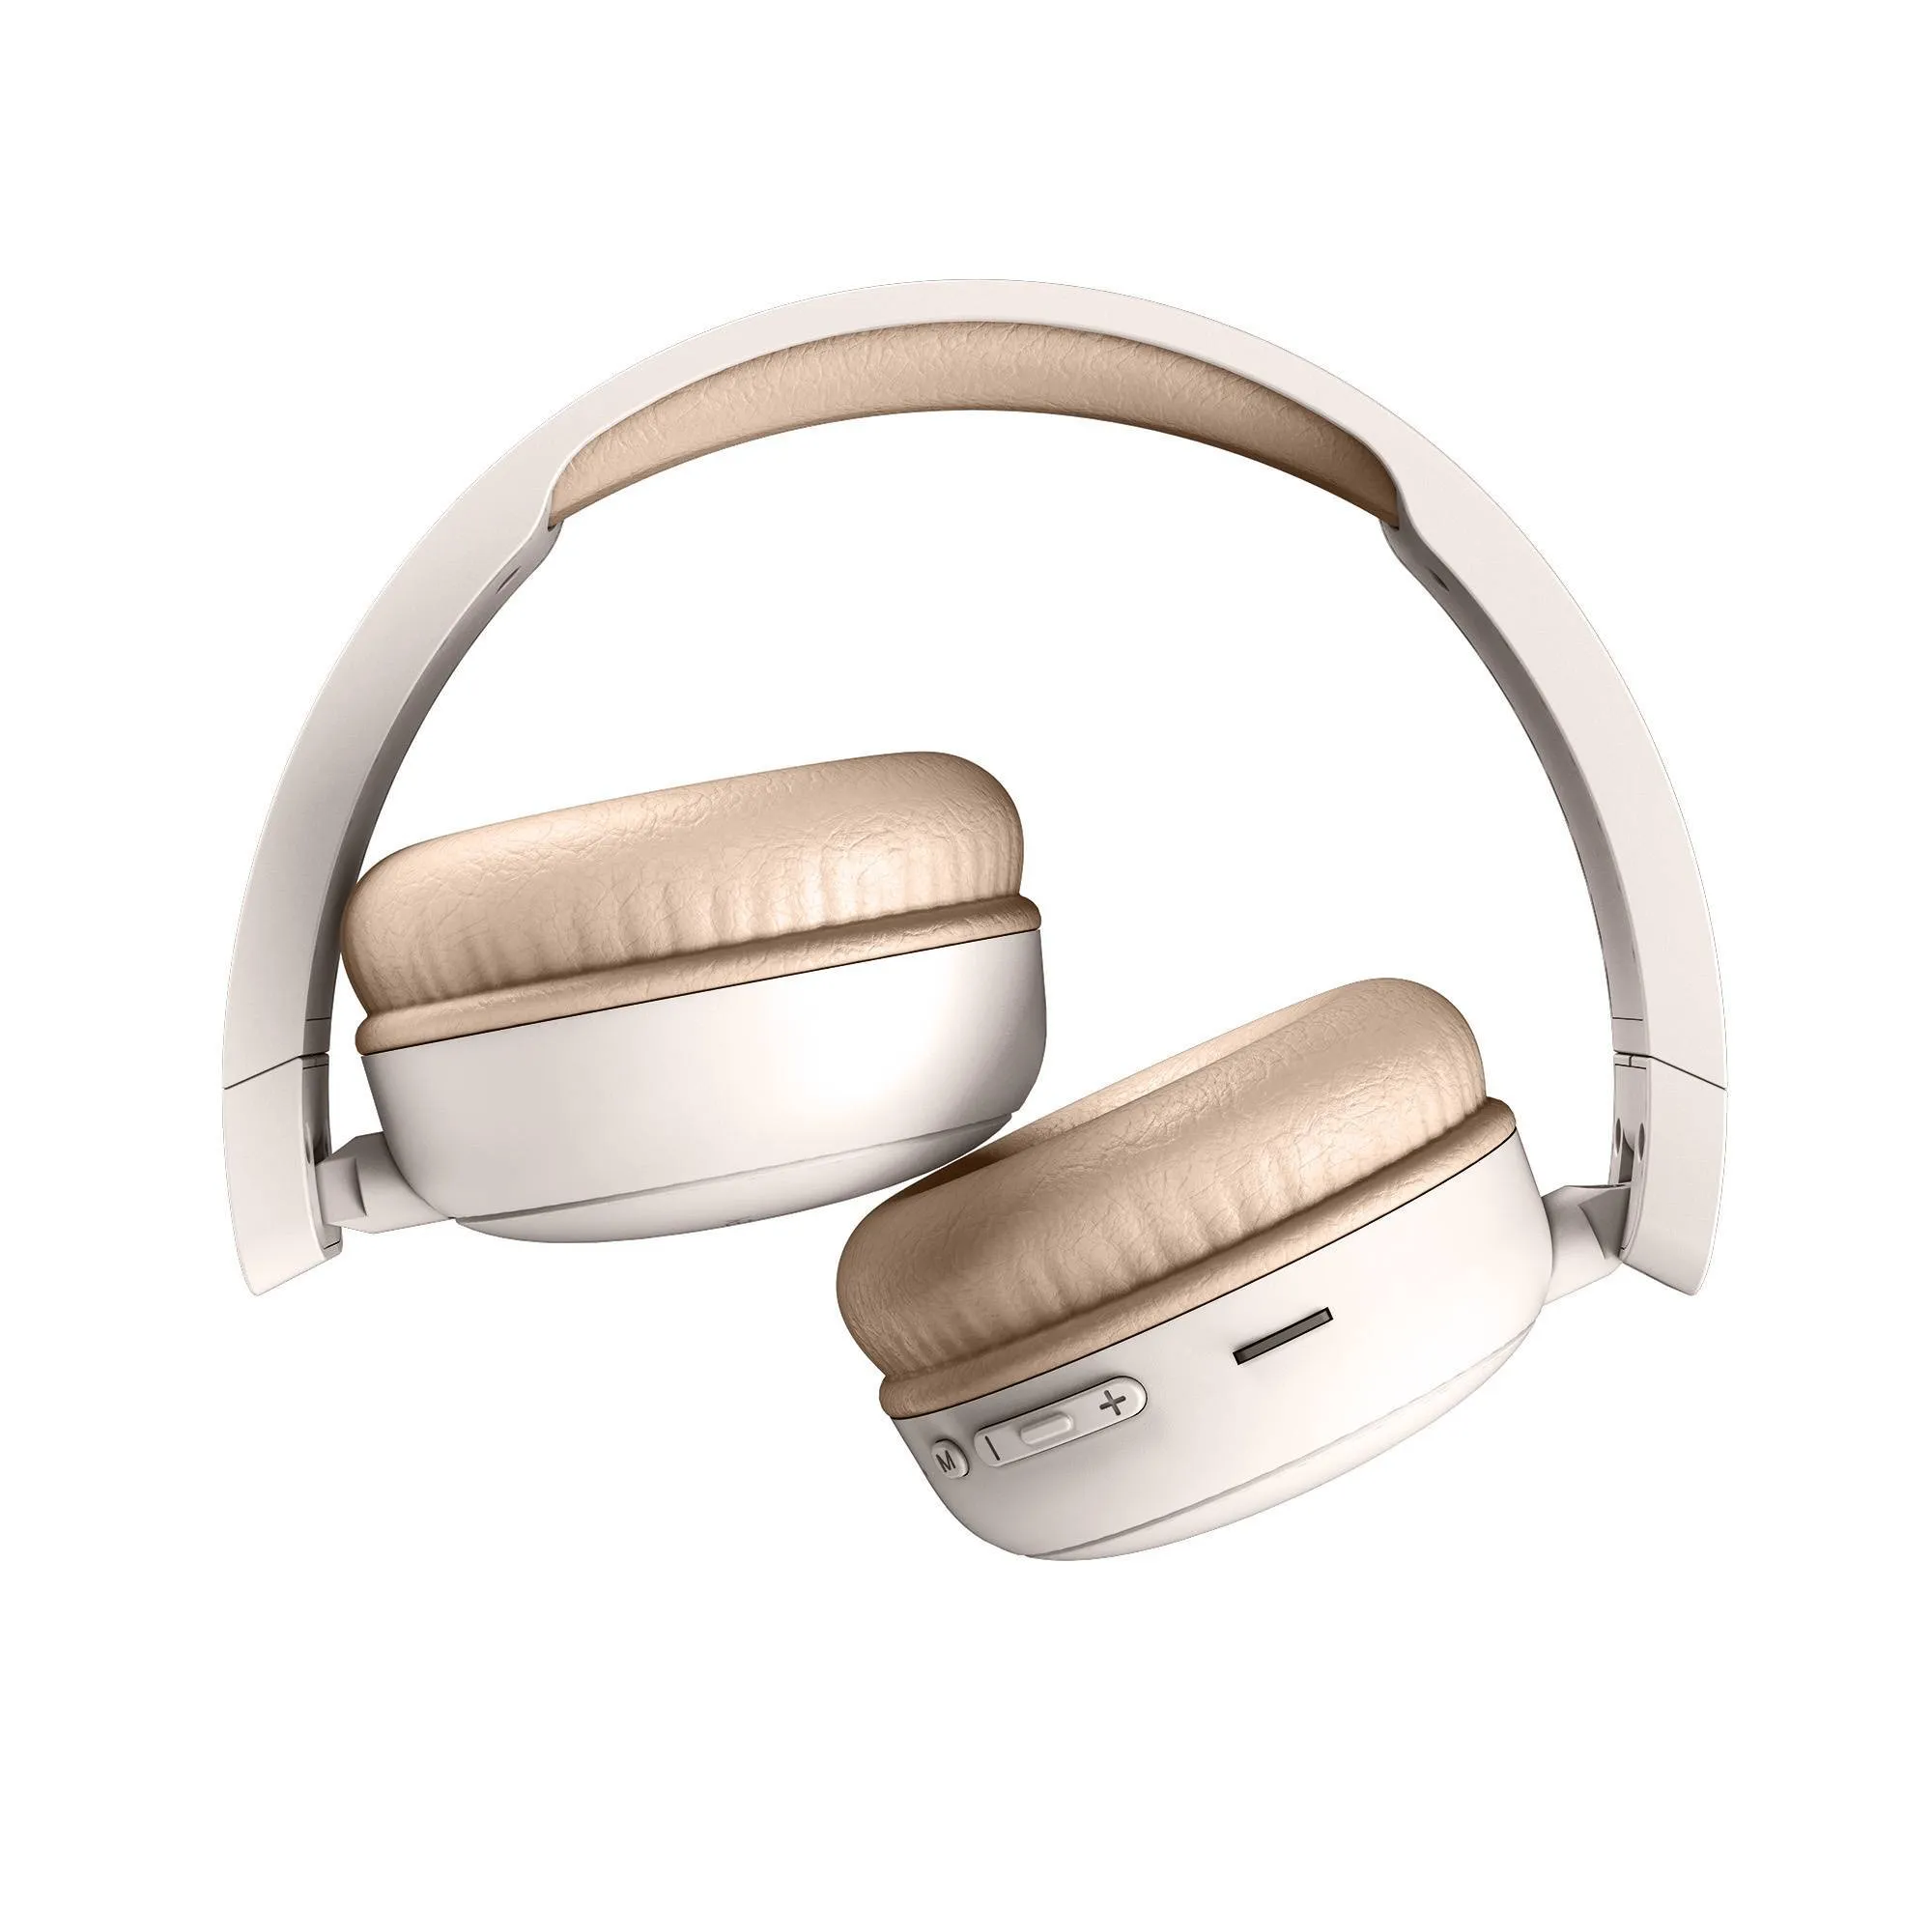 Radio Color cream adjustable headphones with folding system for greater convenience.